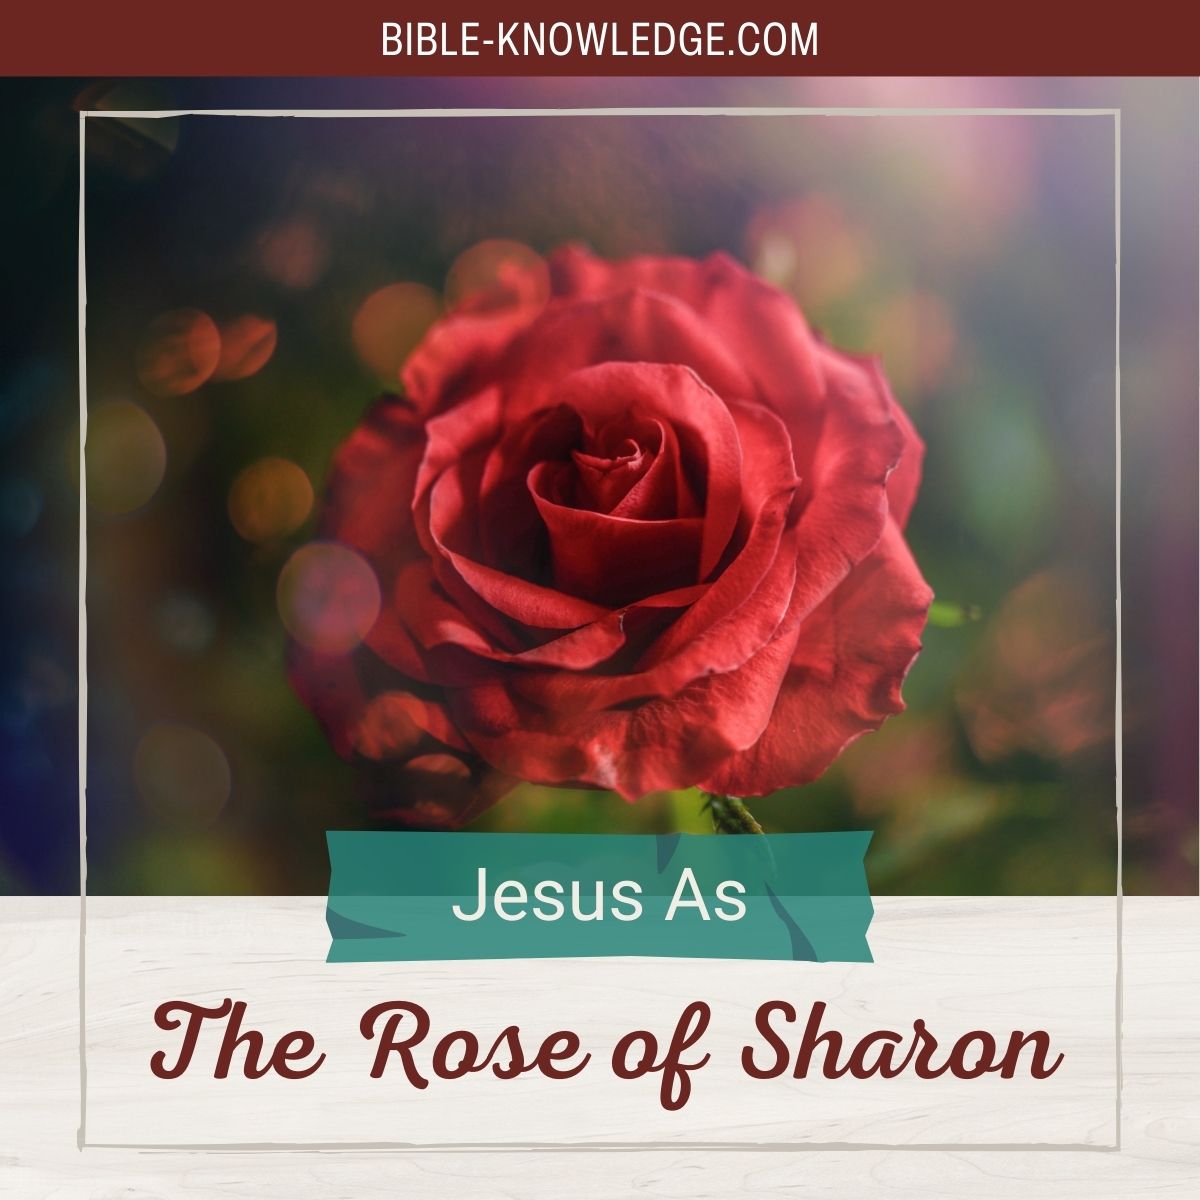 https://www.bible-knowledge.com/wp-content/uploads/jesus-as-the-rose-of-sharon.jpg